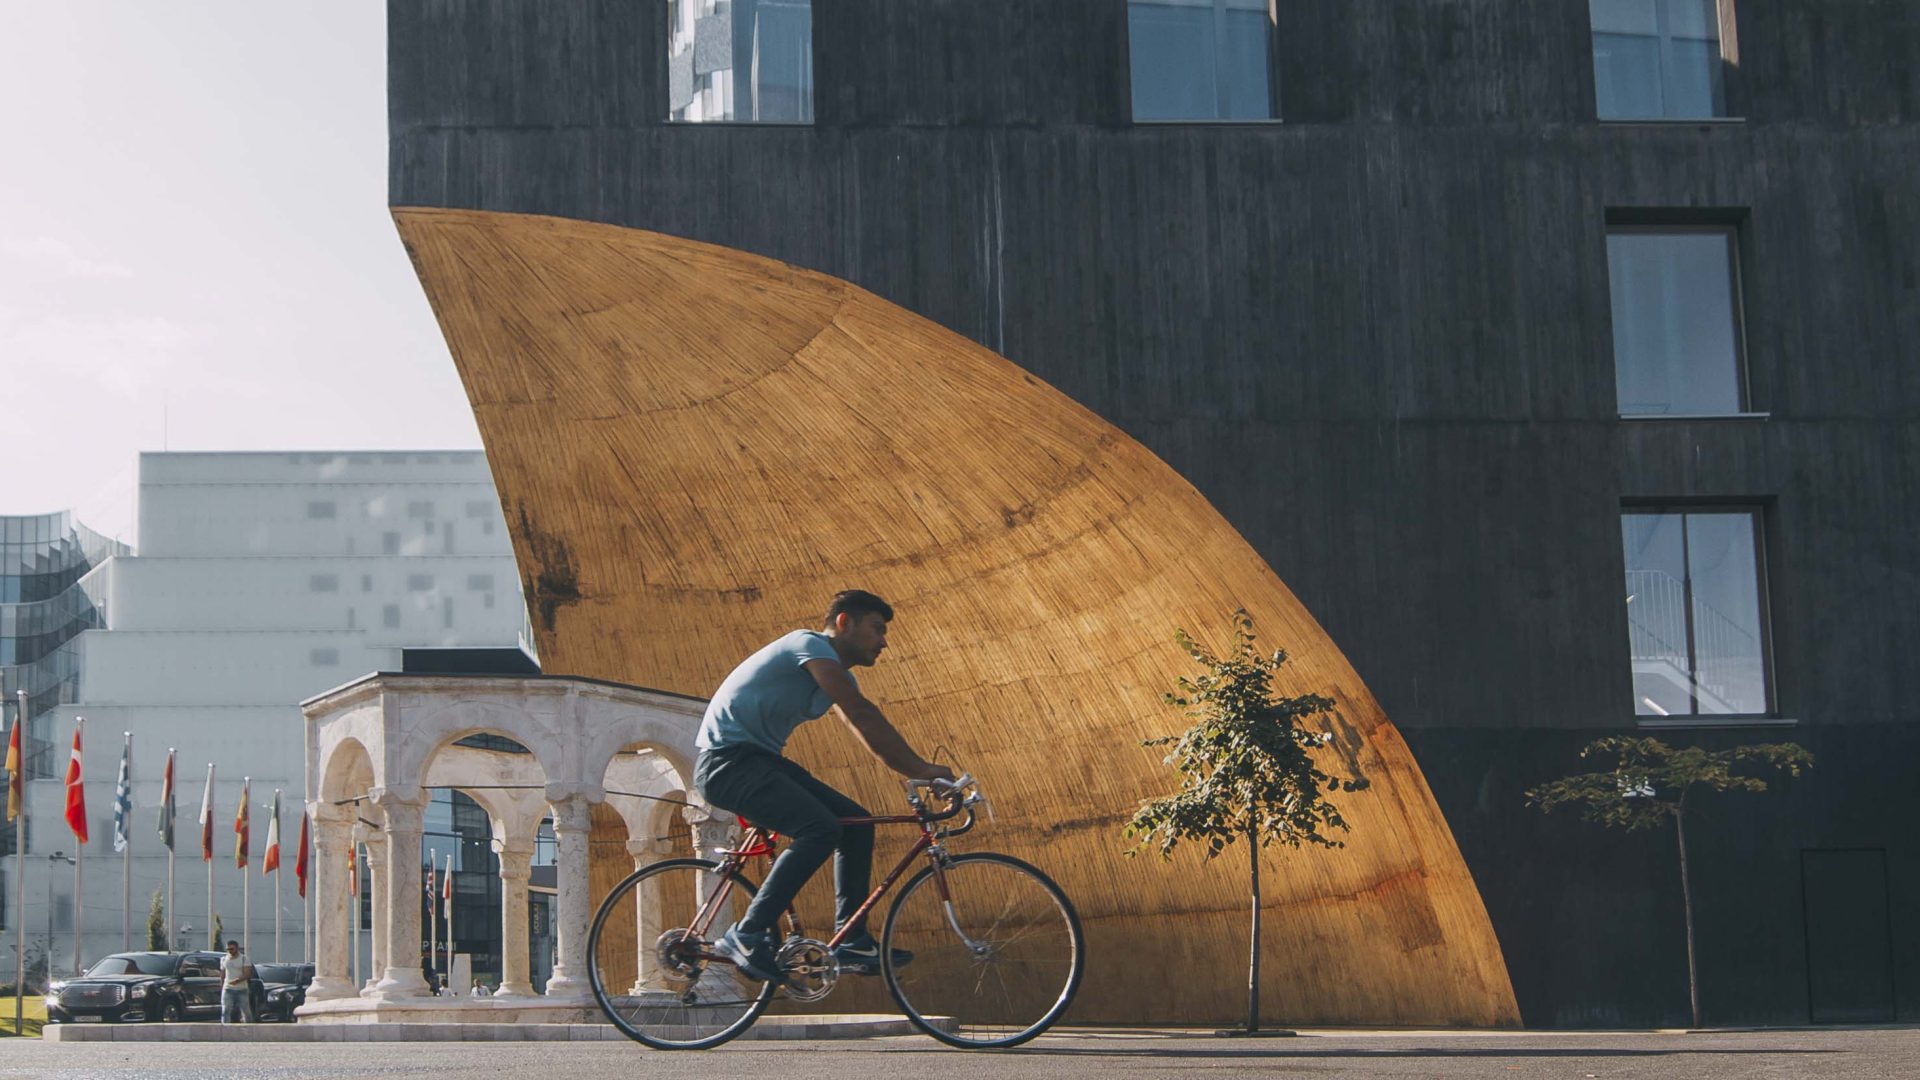 A man rides his bike past a curved shaped building.